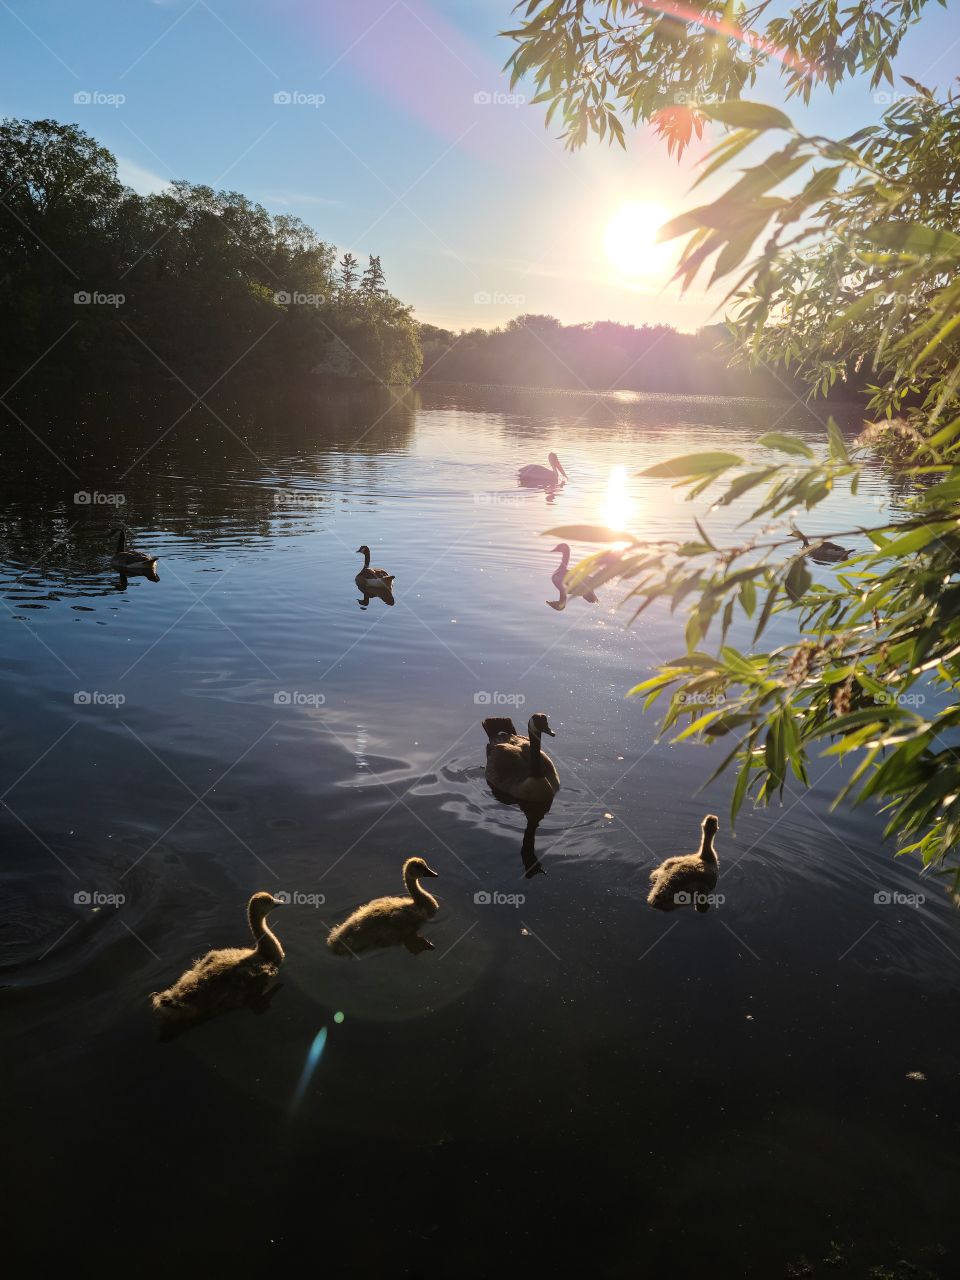 Geese on a lake in the summer.